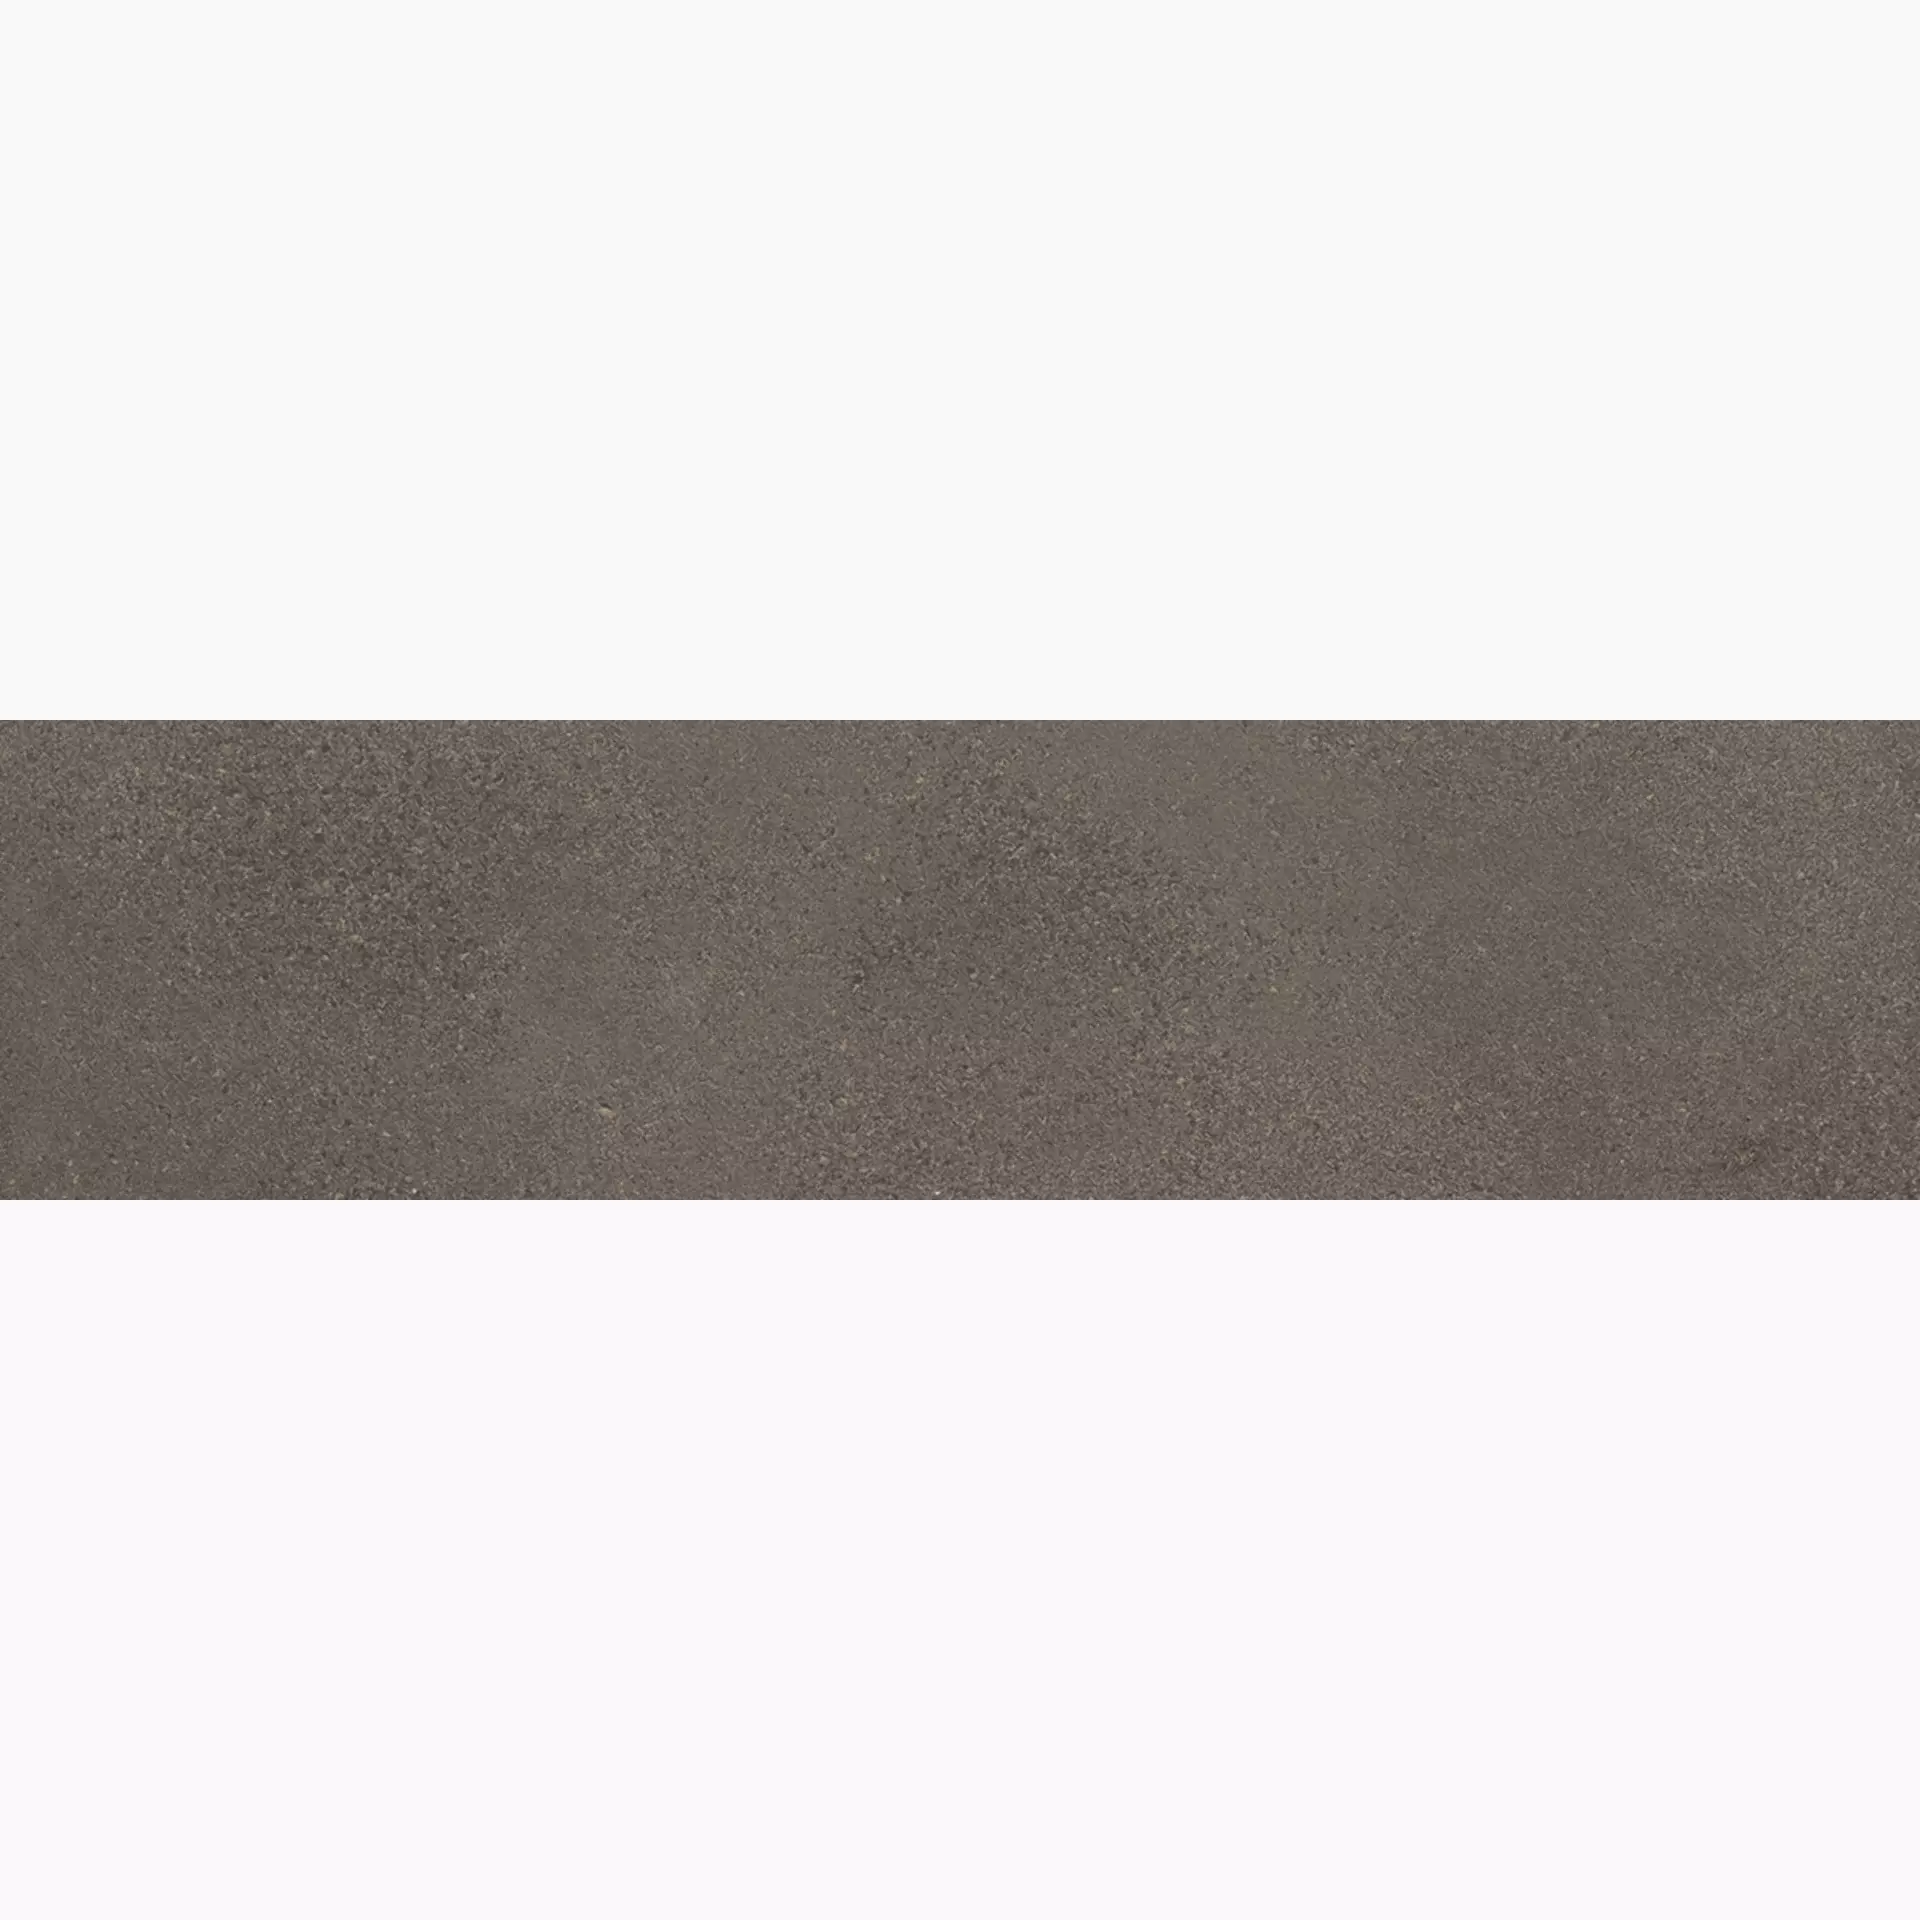 FMG Pietre Trax Brown Naturale P623387 30x120cm rectified 10mm